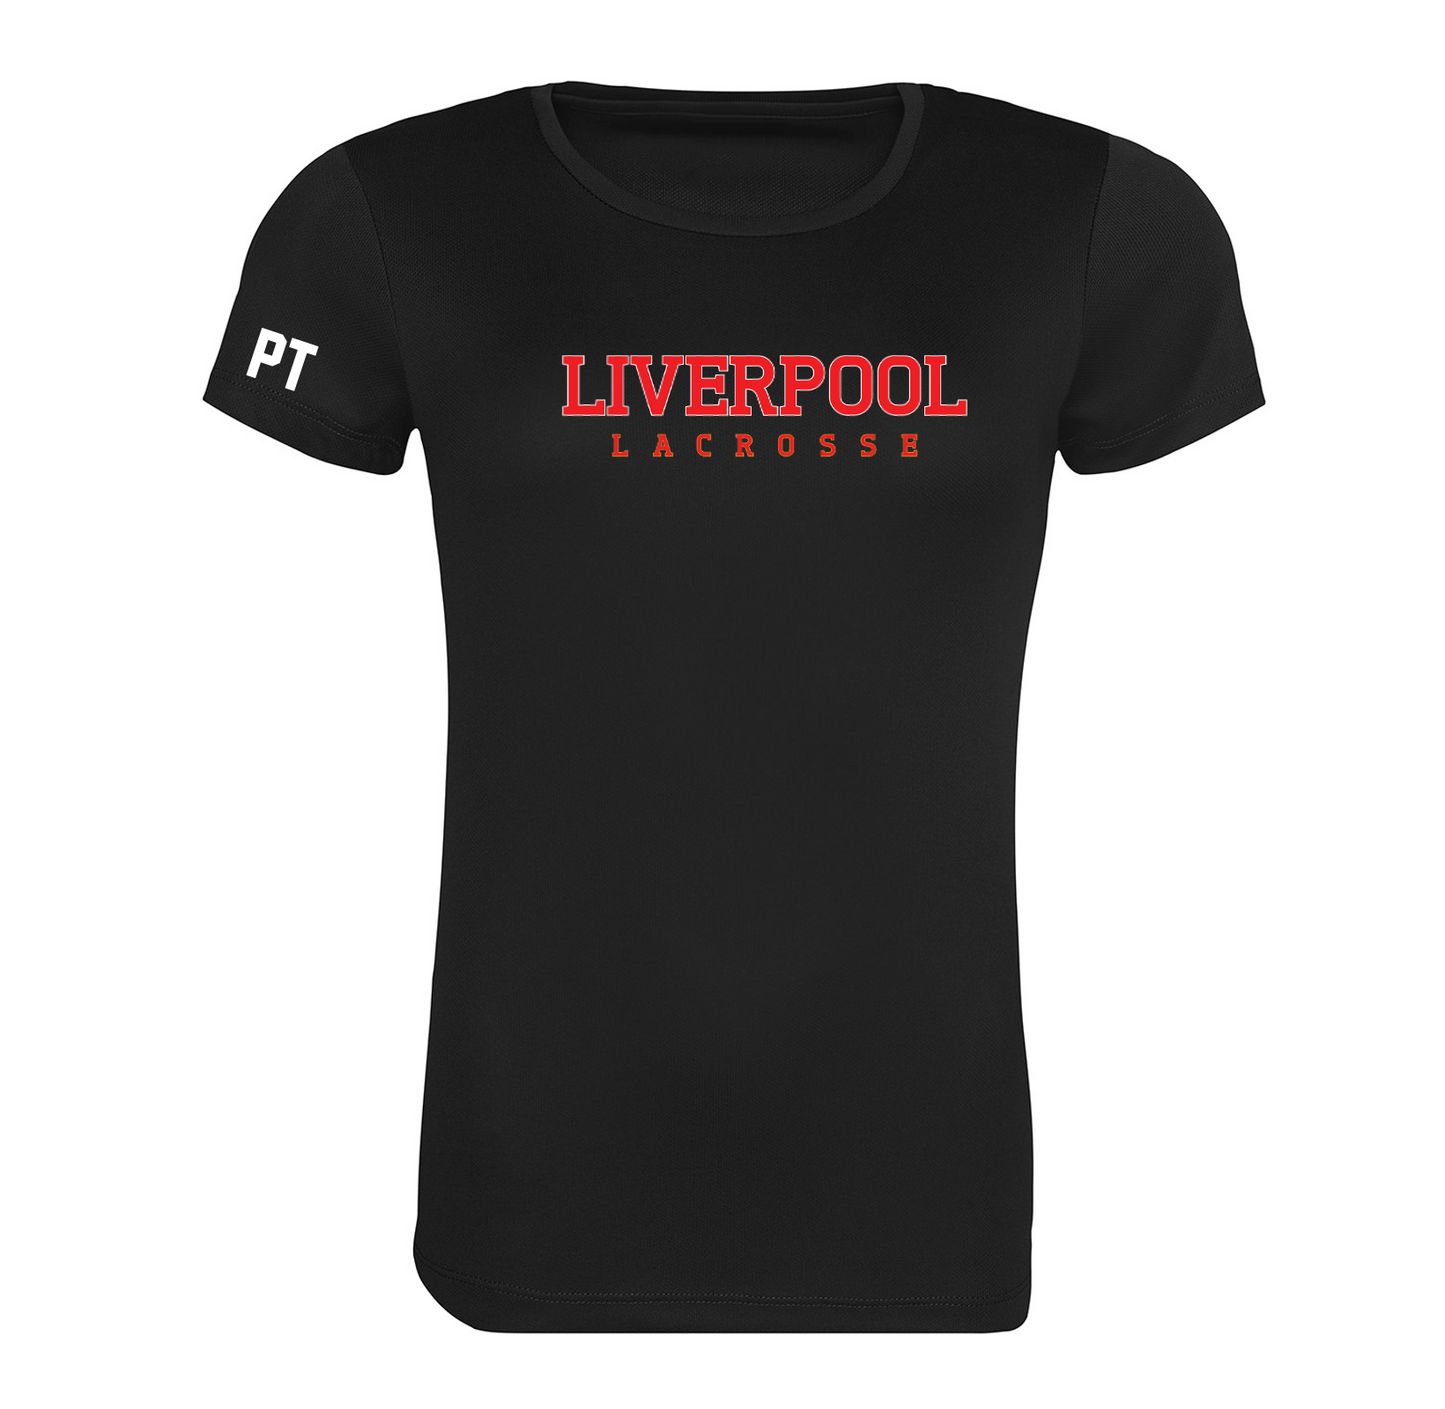 Liverpool Lacrosse Recycled Tech Tee